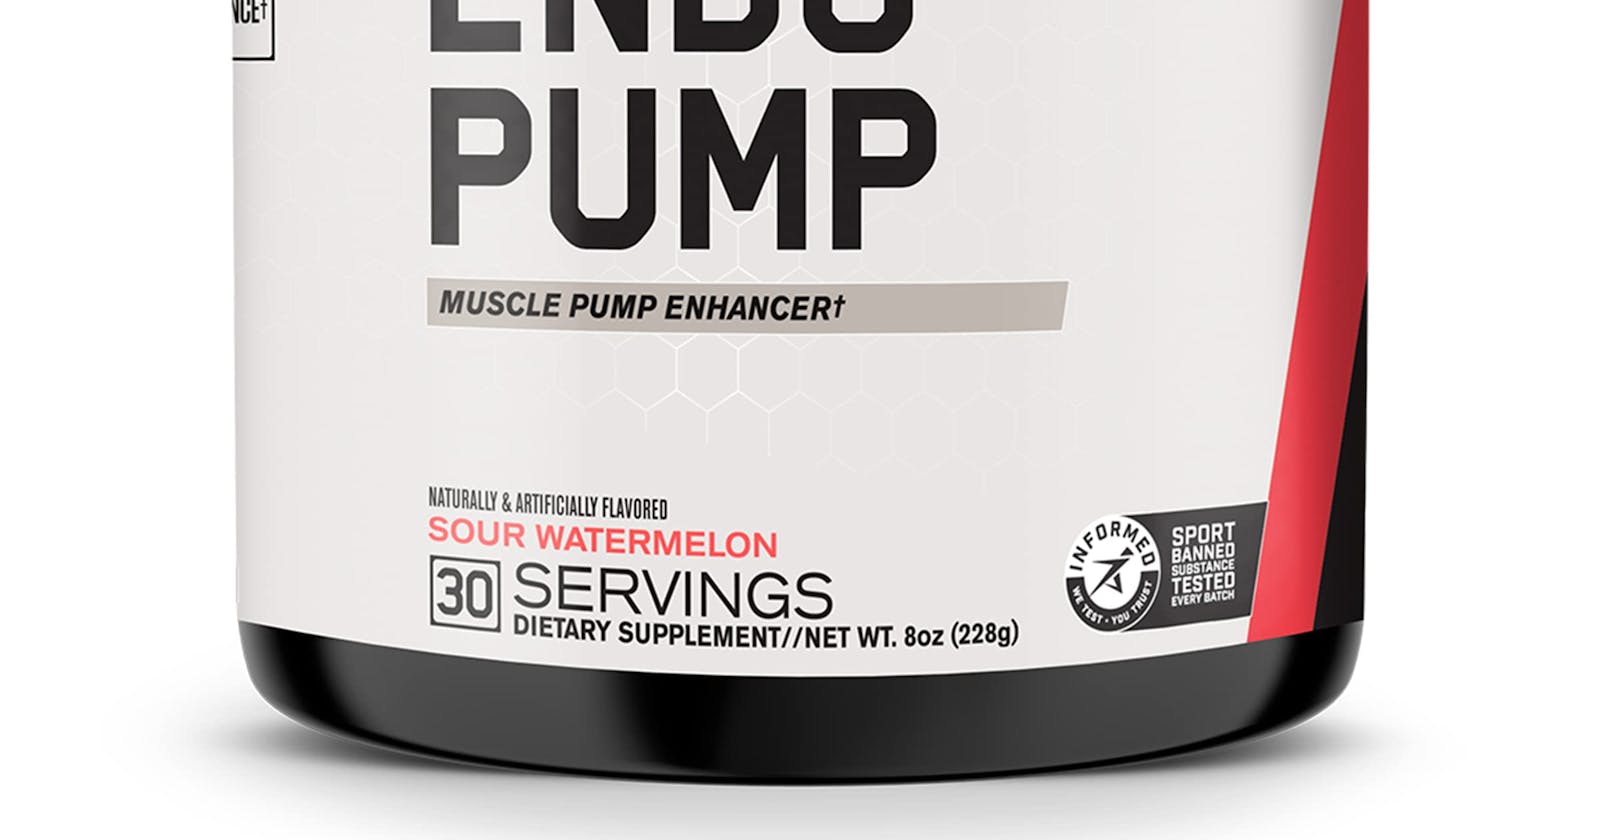 Elevate Your Training to New Heights with-ENDO PUMP